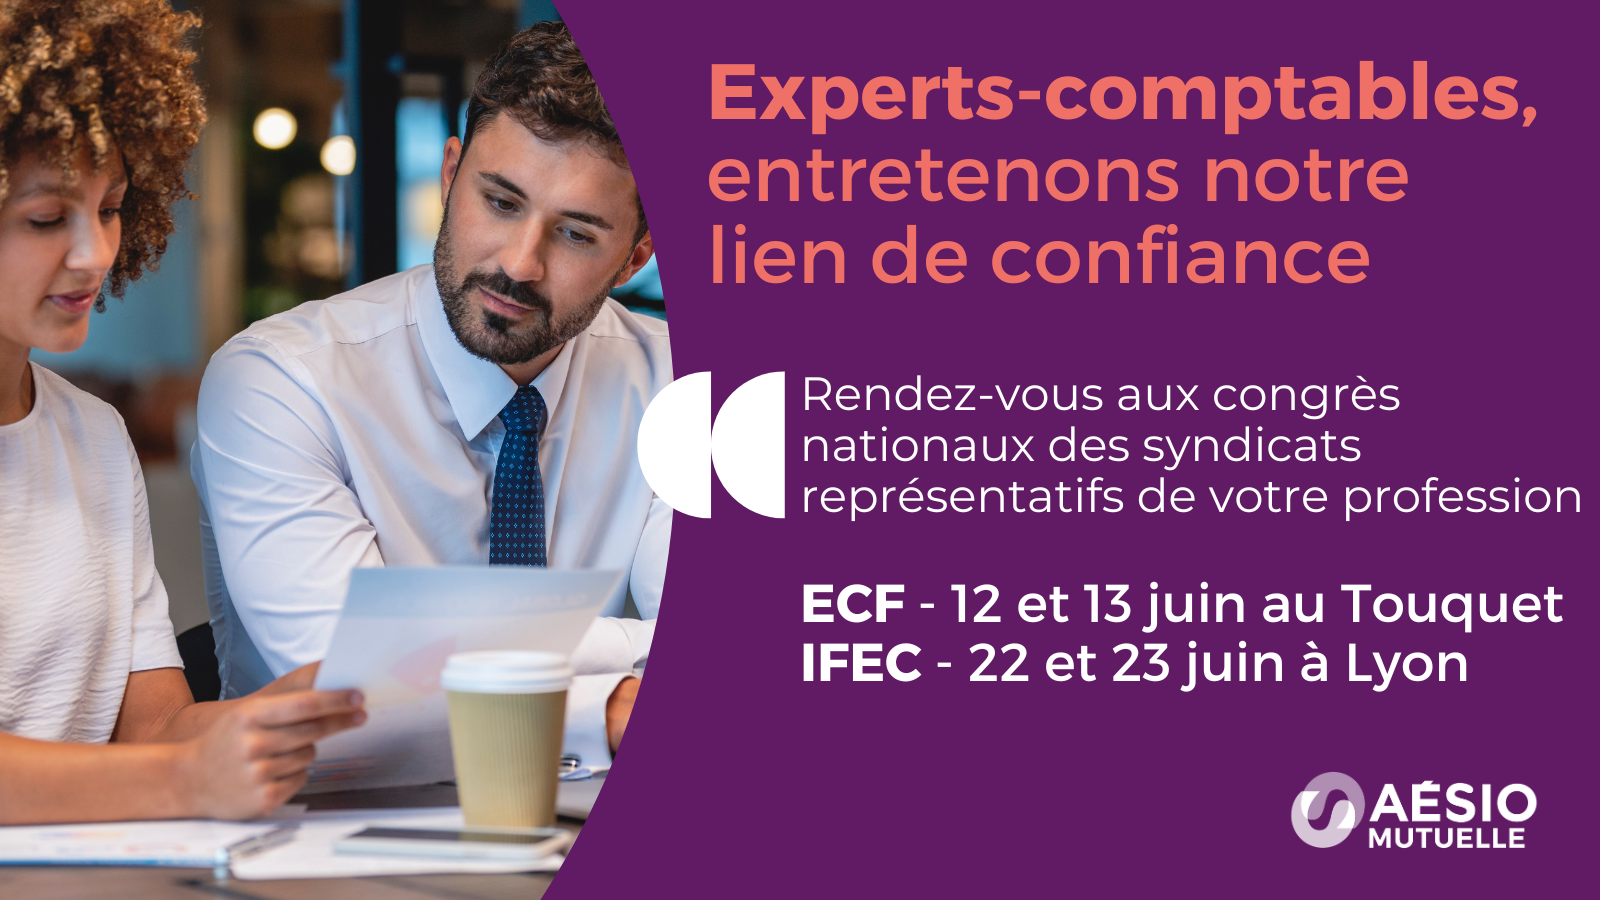 Congrès Experts comptable 20253 aesio mutuelle